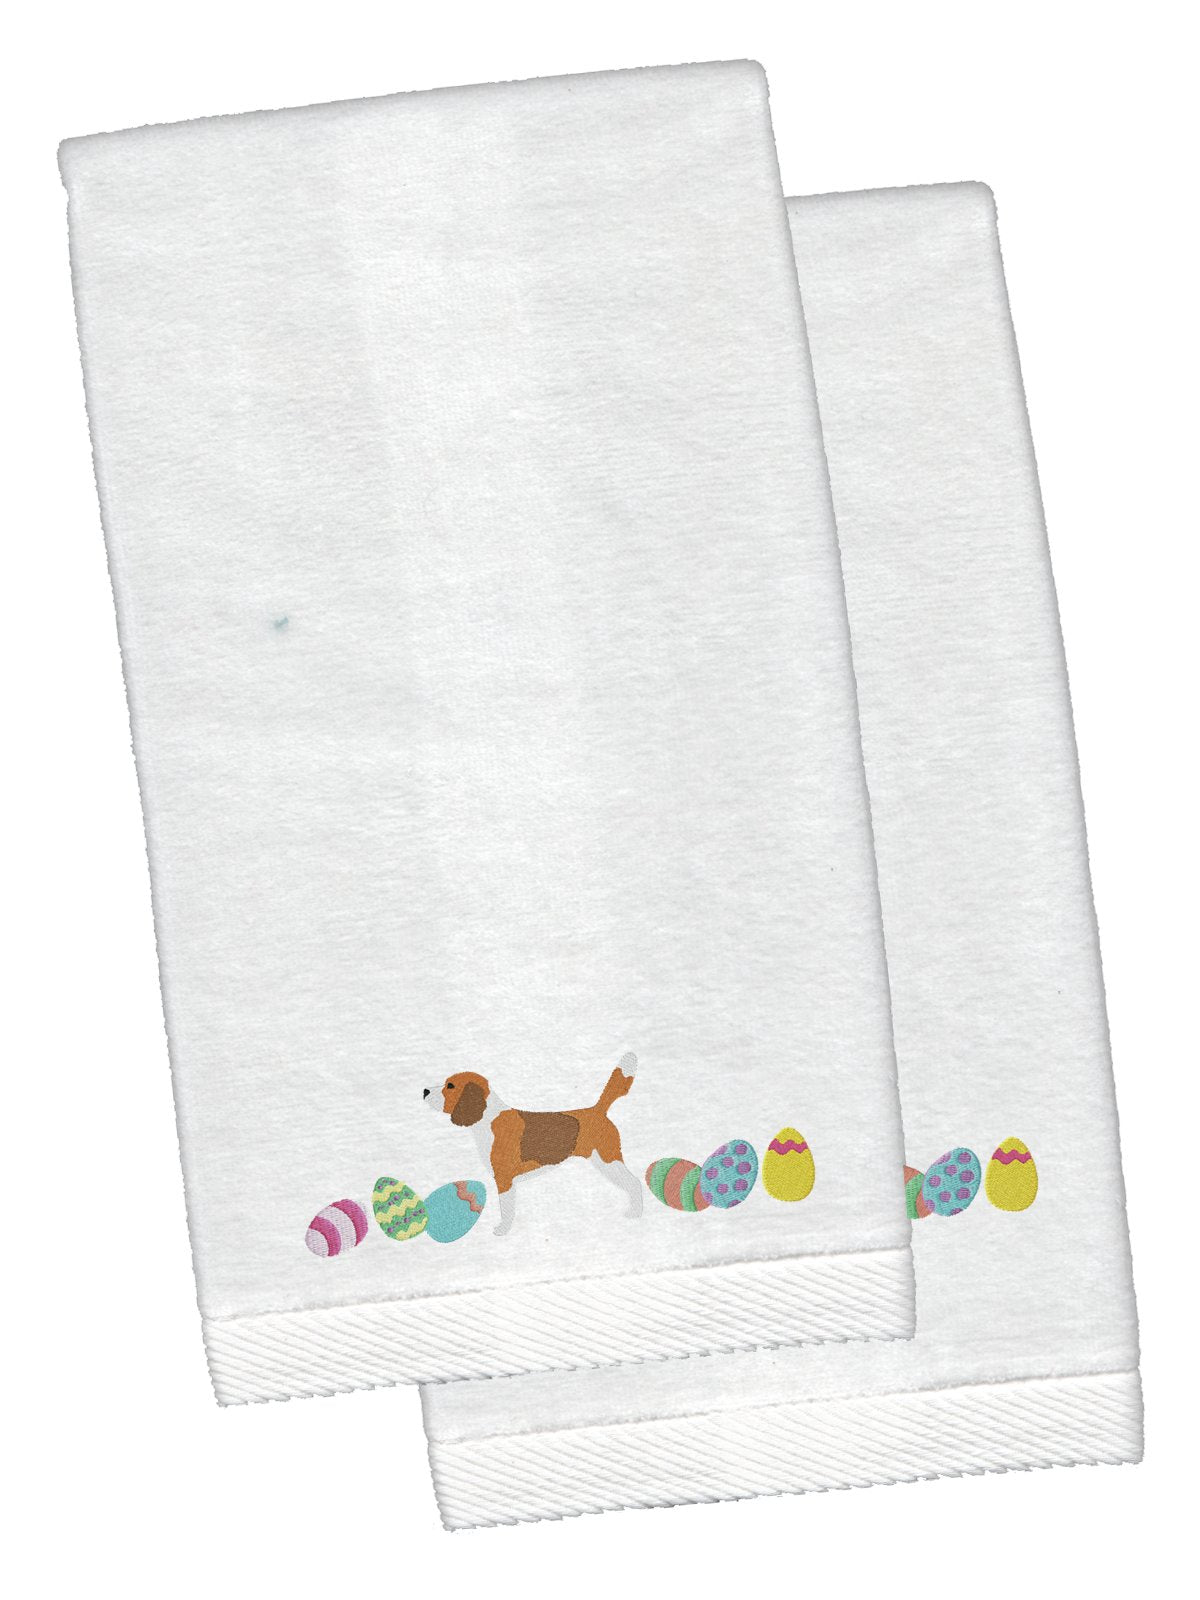 Beagle Easter White Embroidered Plush Hand Towel Set of 2 CK1604KTEMB by Caroline's Treasures